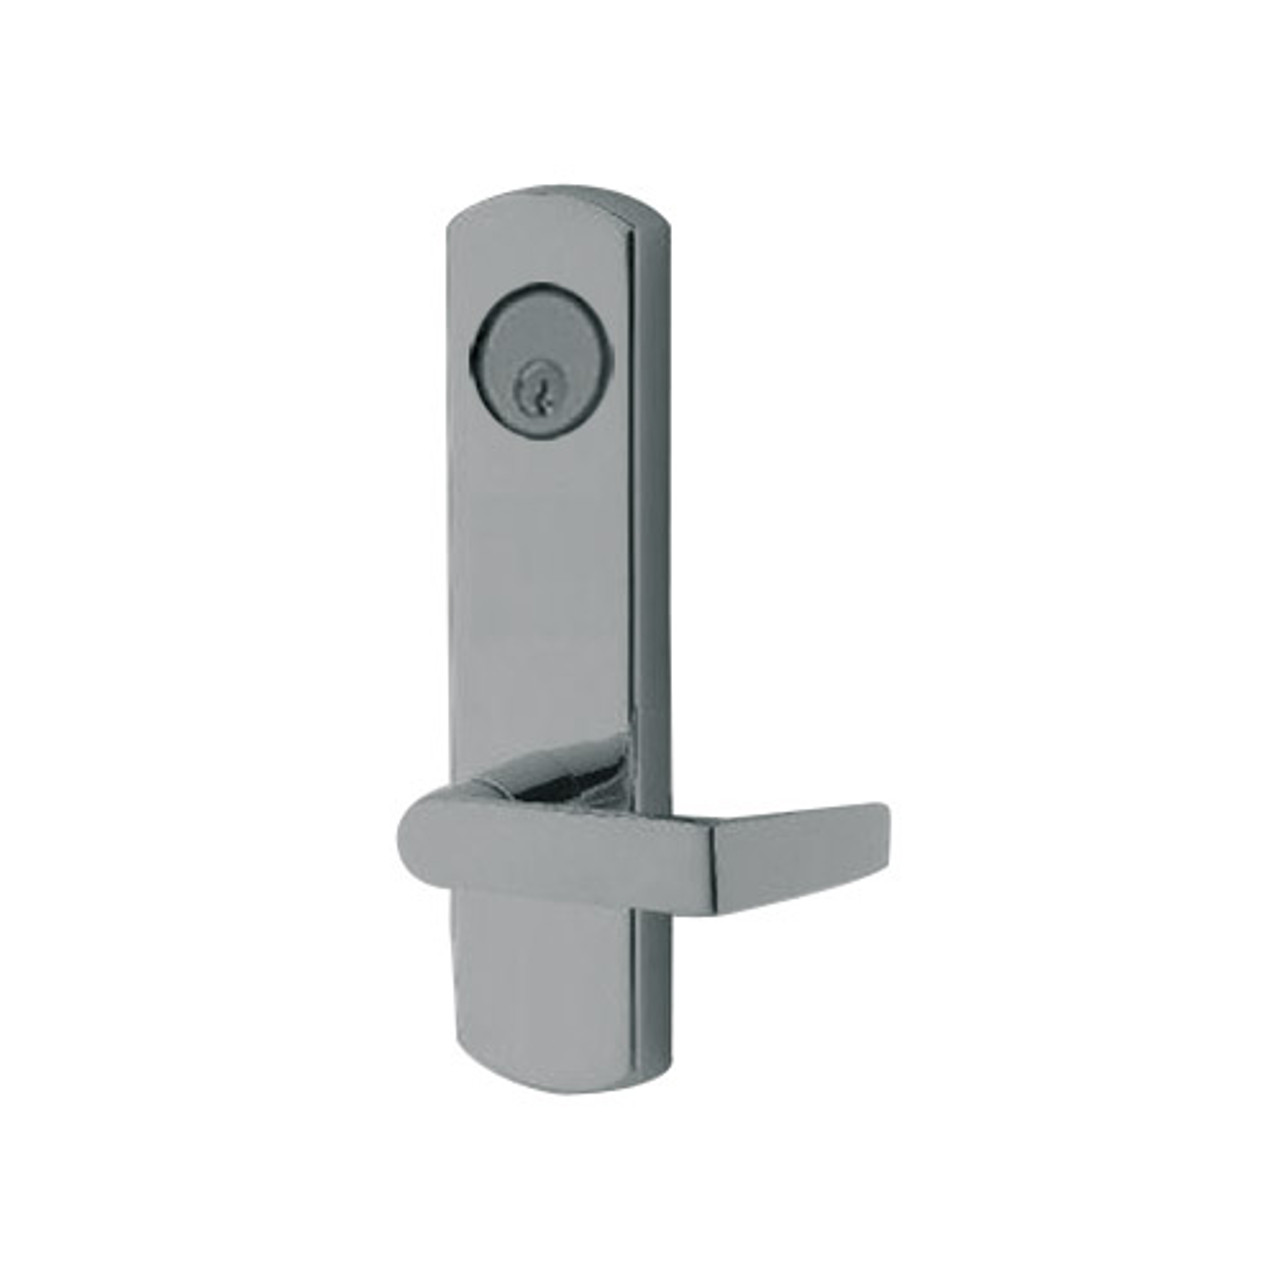 3080E-03-0-3U-35 US32D Adams Rite Electrified Entry Trim with Square Lever in Satin Stainless Finish